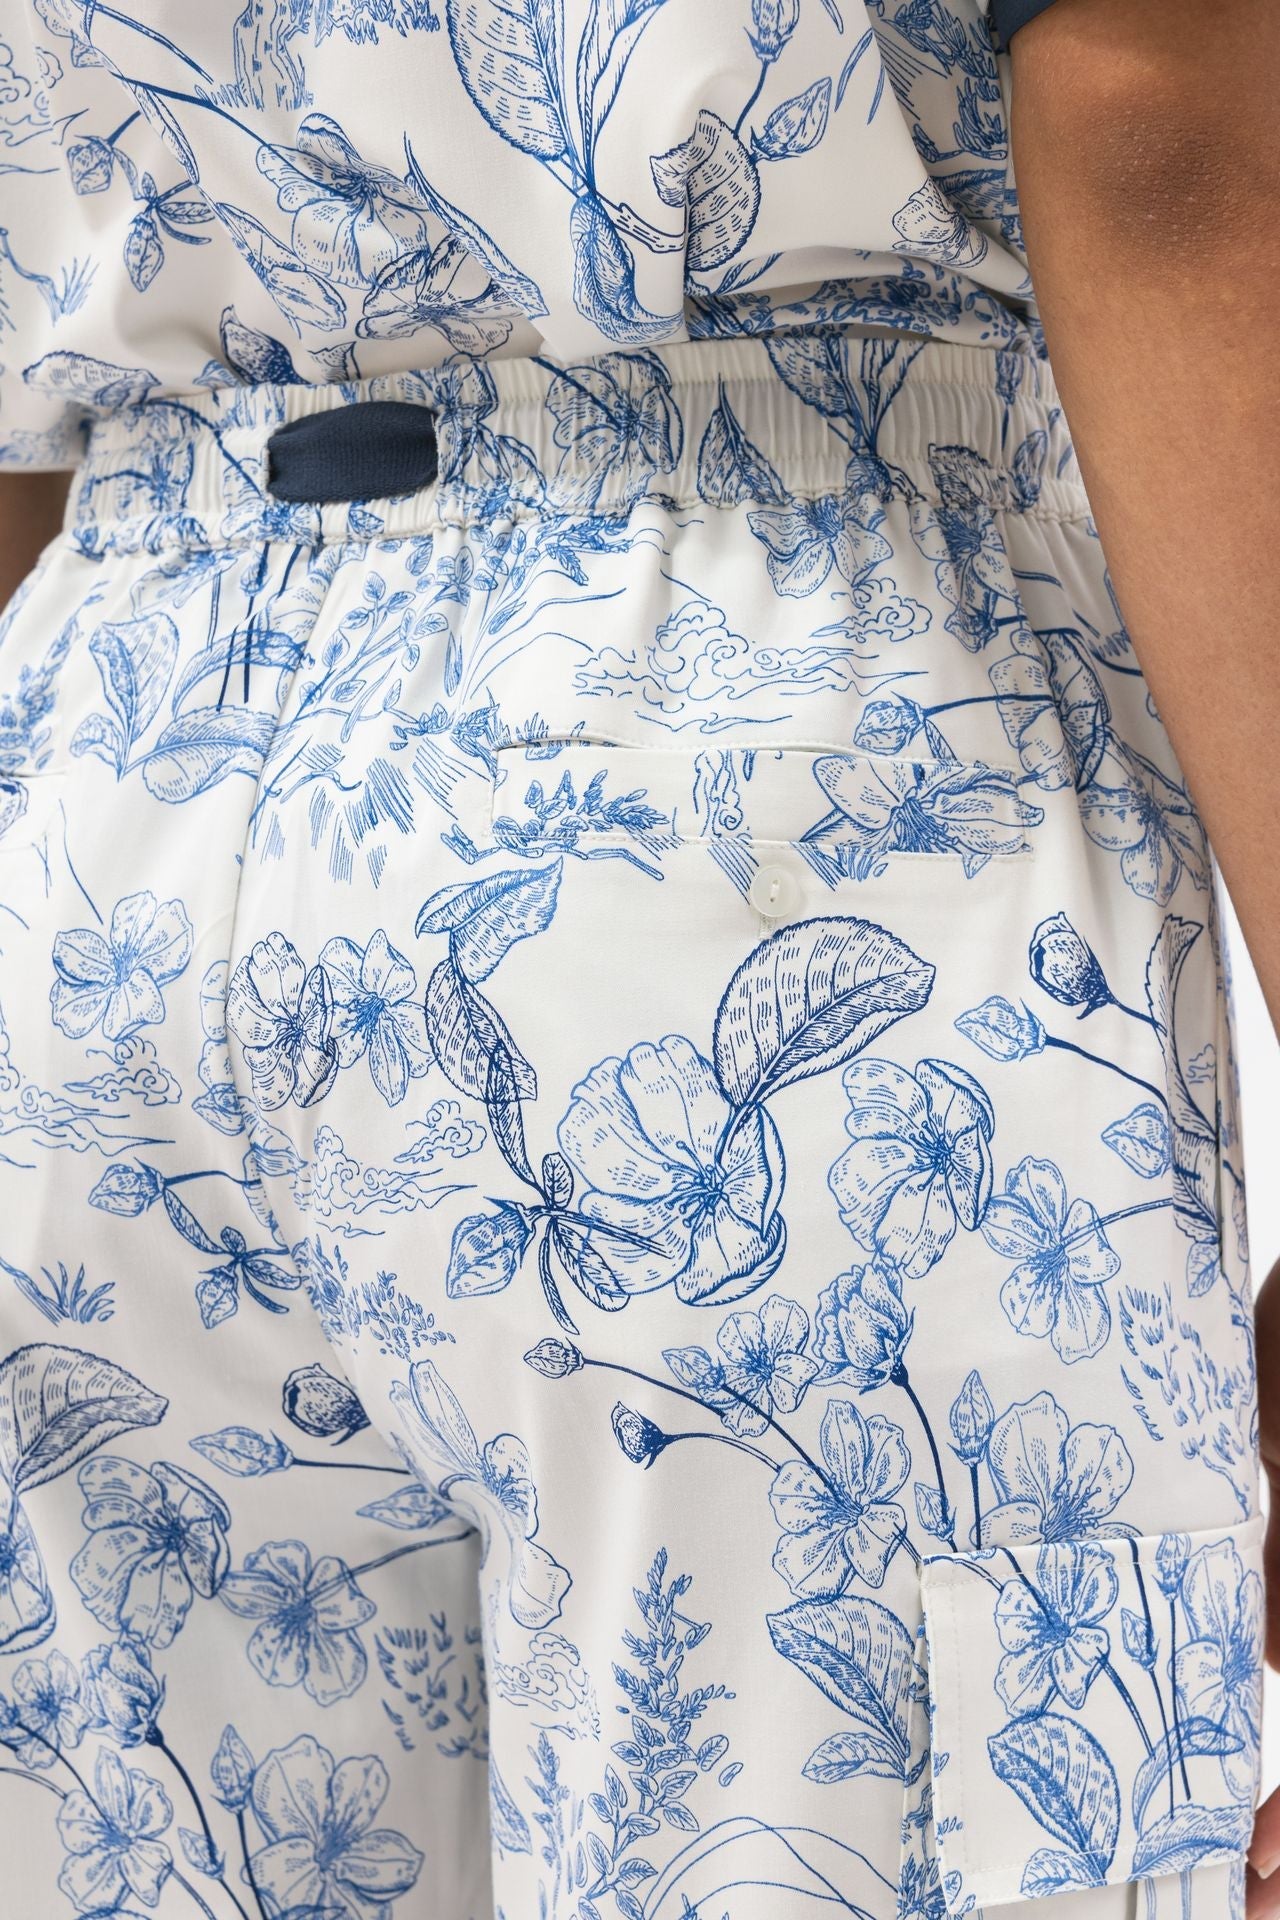 Patterned Relax Cargo Shorts